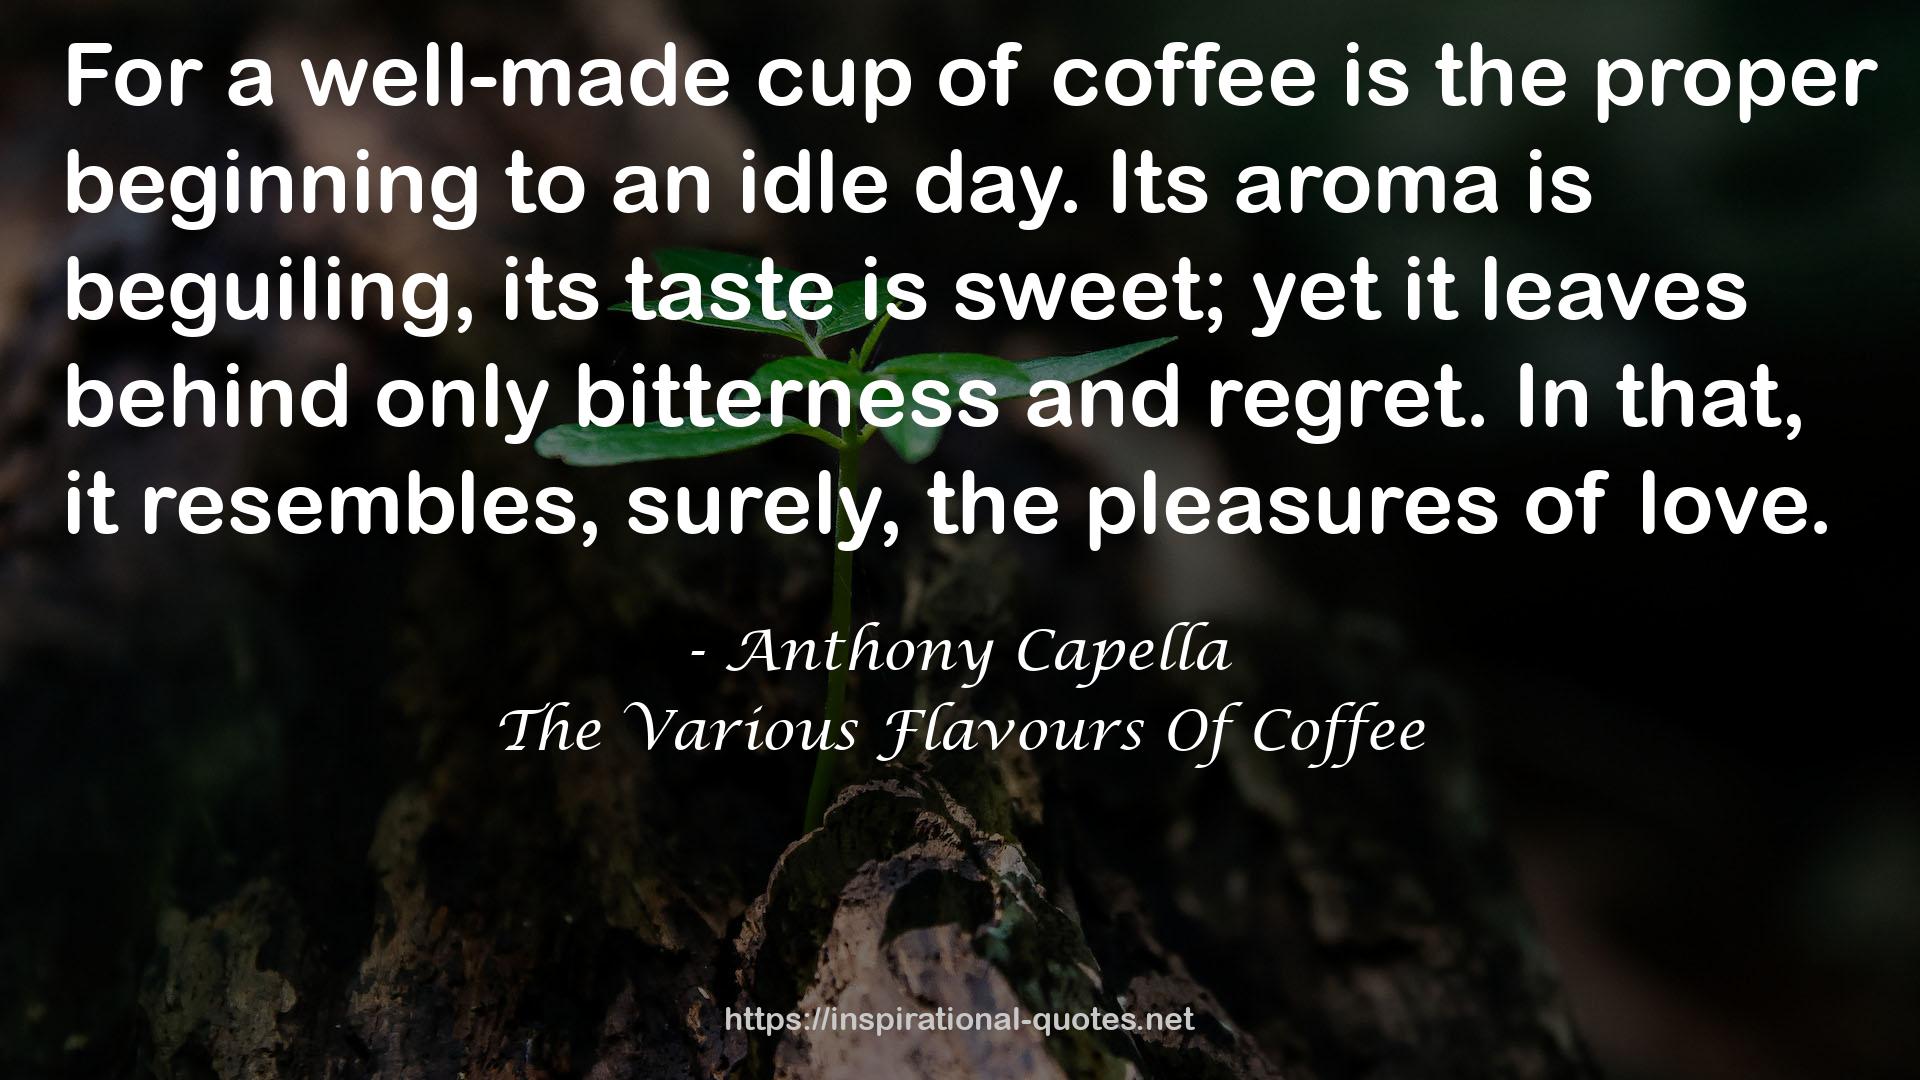 The Various Flavours Of Coffee QUOTES